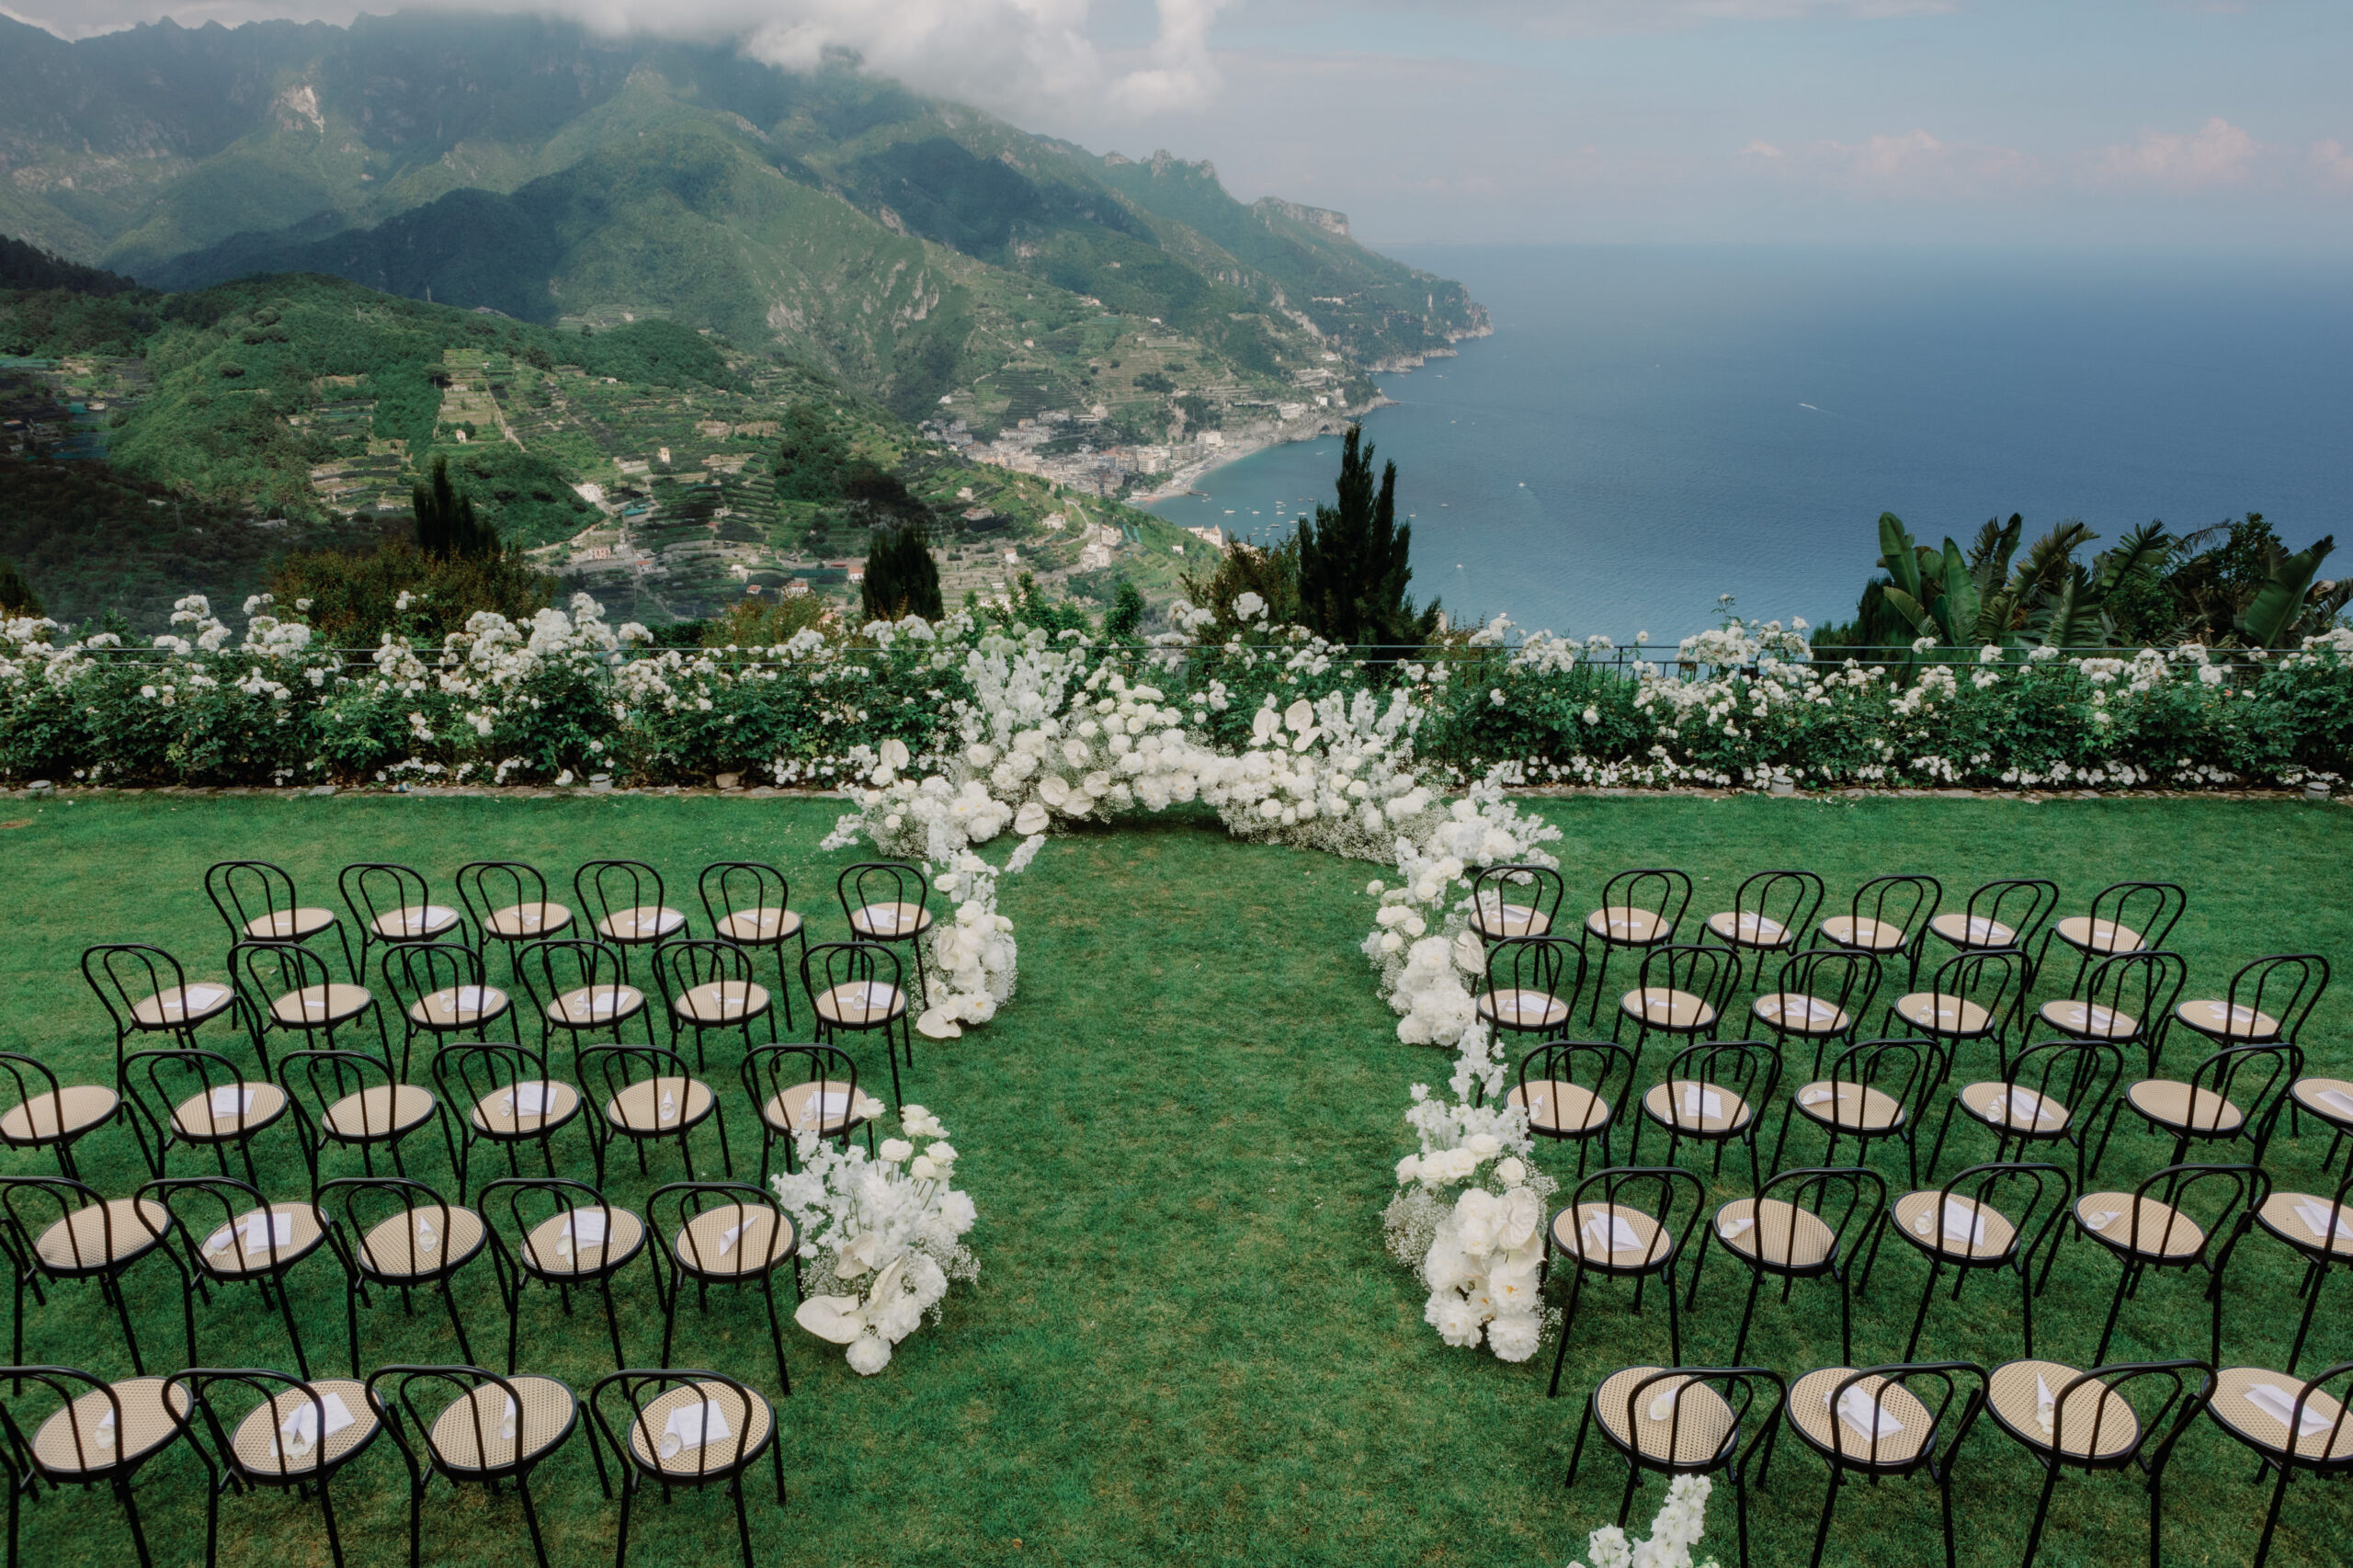 Enchanting wedding ceremony set up at the iconic Caruso, a Belmond Hotel, overlooking the breathtaking Amalfi Coast. The panoramic view features the azure waters, fluffy clouds, and majestic mountains on a beautiful Saturday in June, creating a picture-perfect backdrop for a romantic celebration.